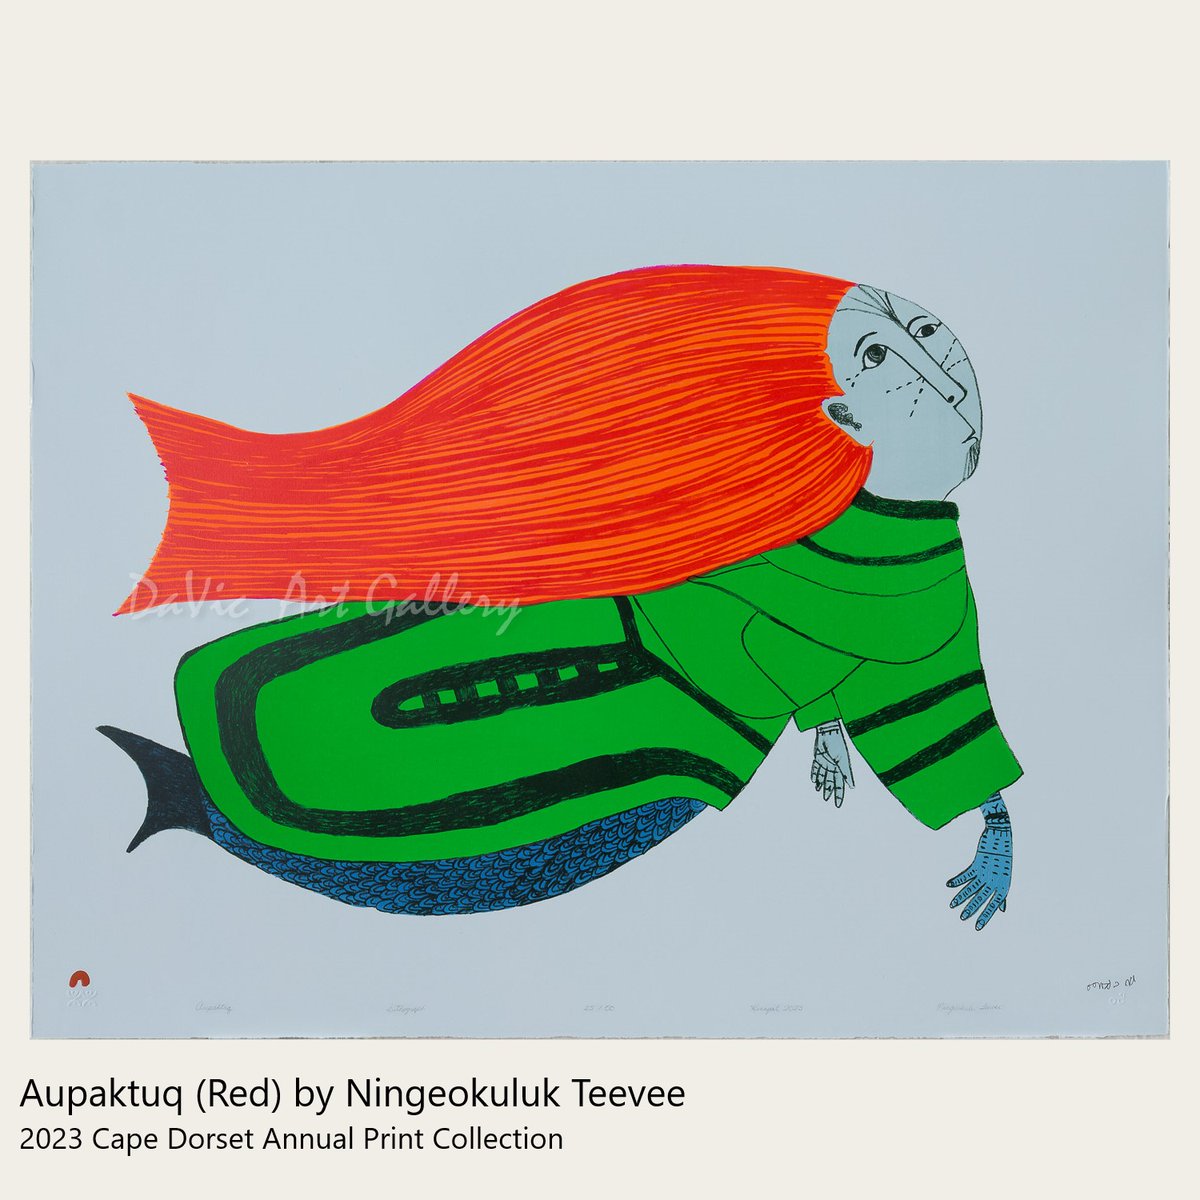 Aupaktuq (Red) by Ningeokuluk Teevee - Available!
2023 Cape Dorset Annual Print Collection
nativecanadianarts.com/gallery/aupakt…

#dorsetfinearts #nativecanadianarts #inuitart #Art #artcollector #officedecor #homedecoration #sedna